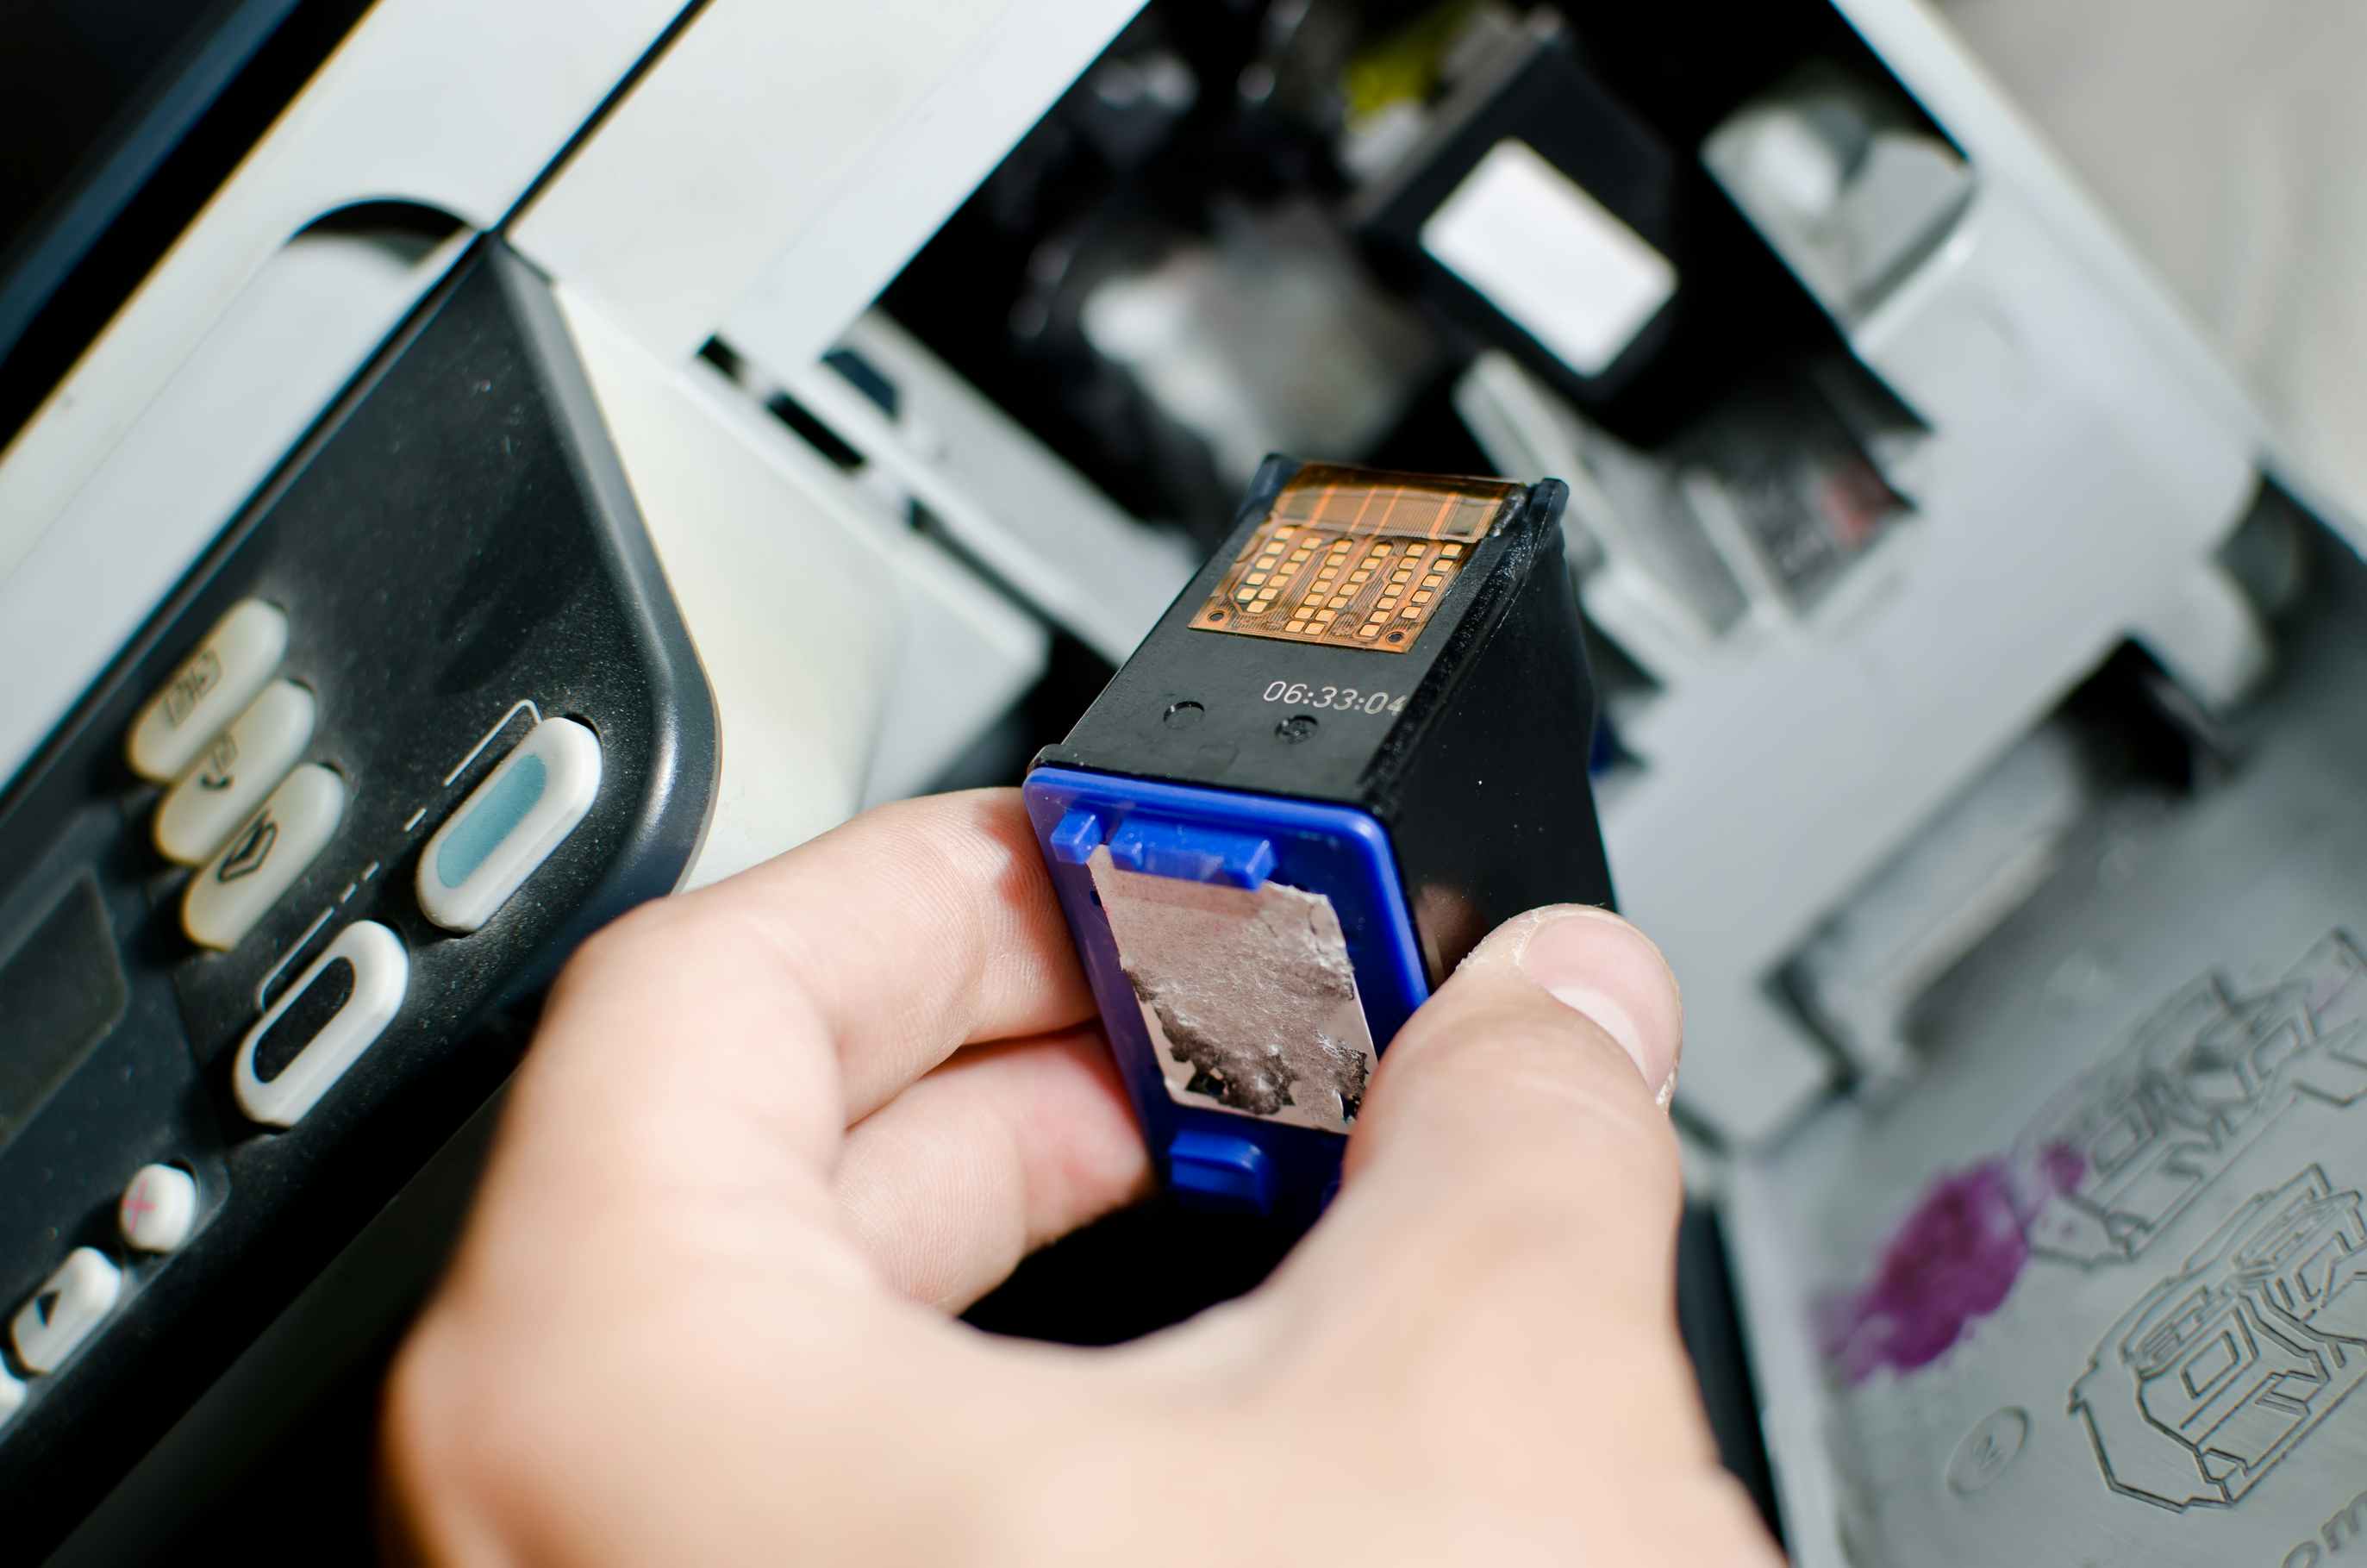 Printer cartridge being removed from a printer